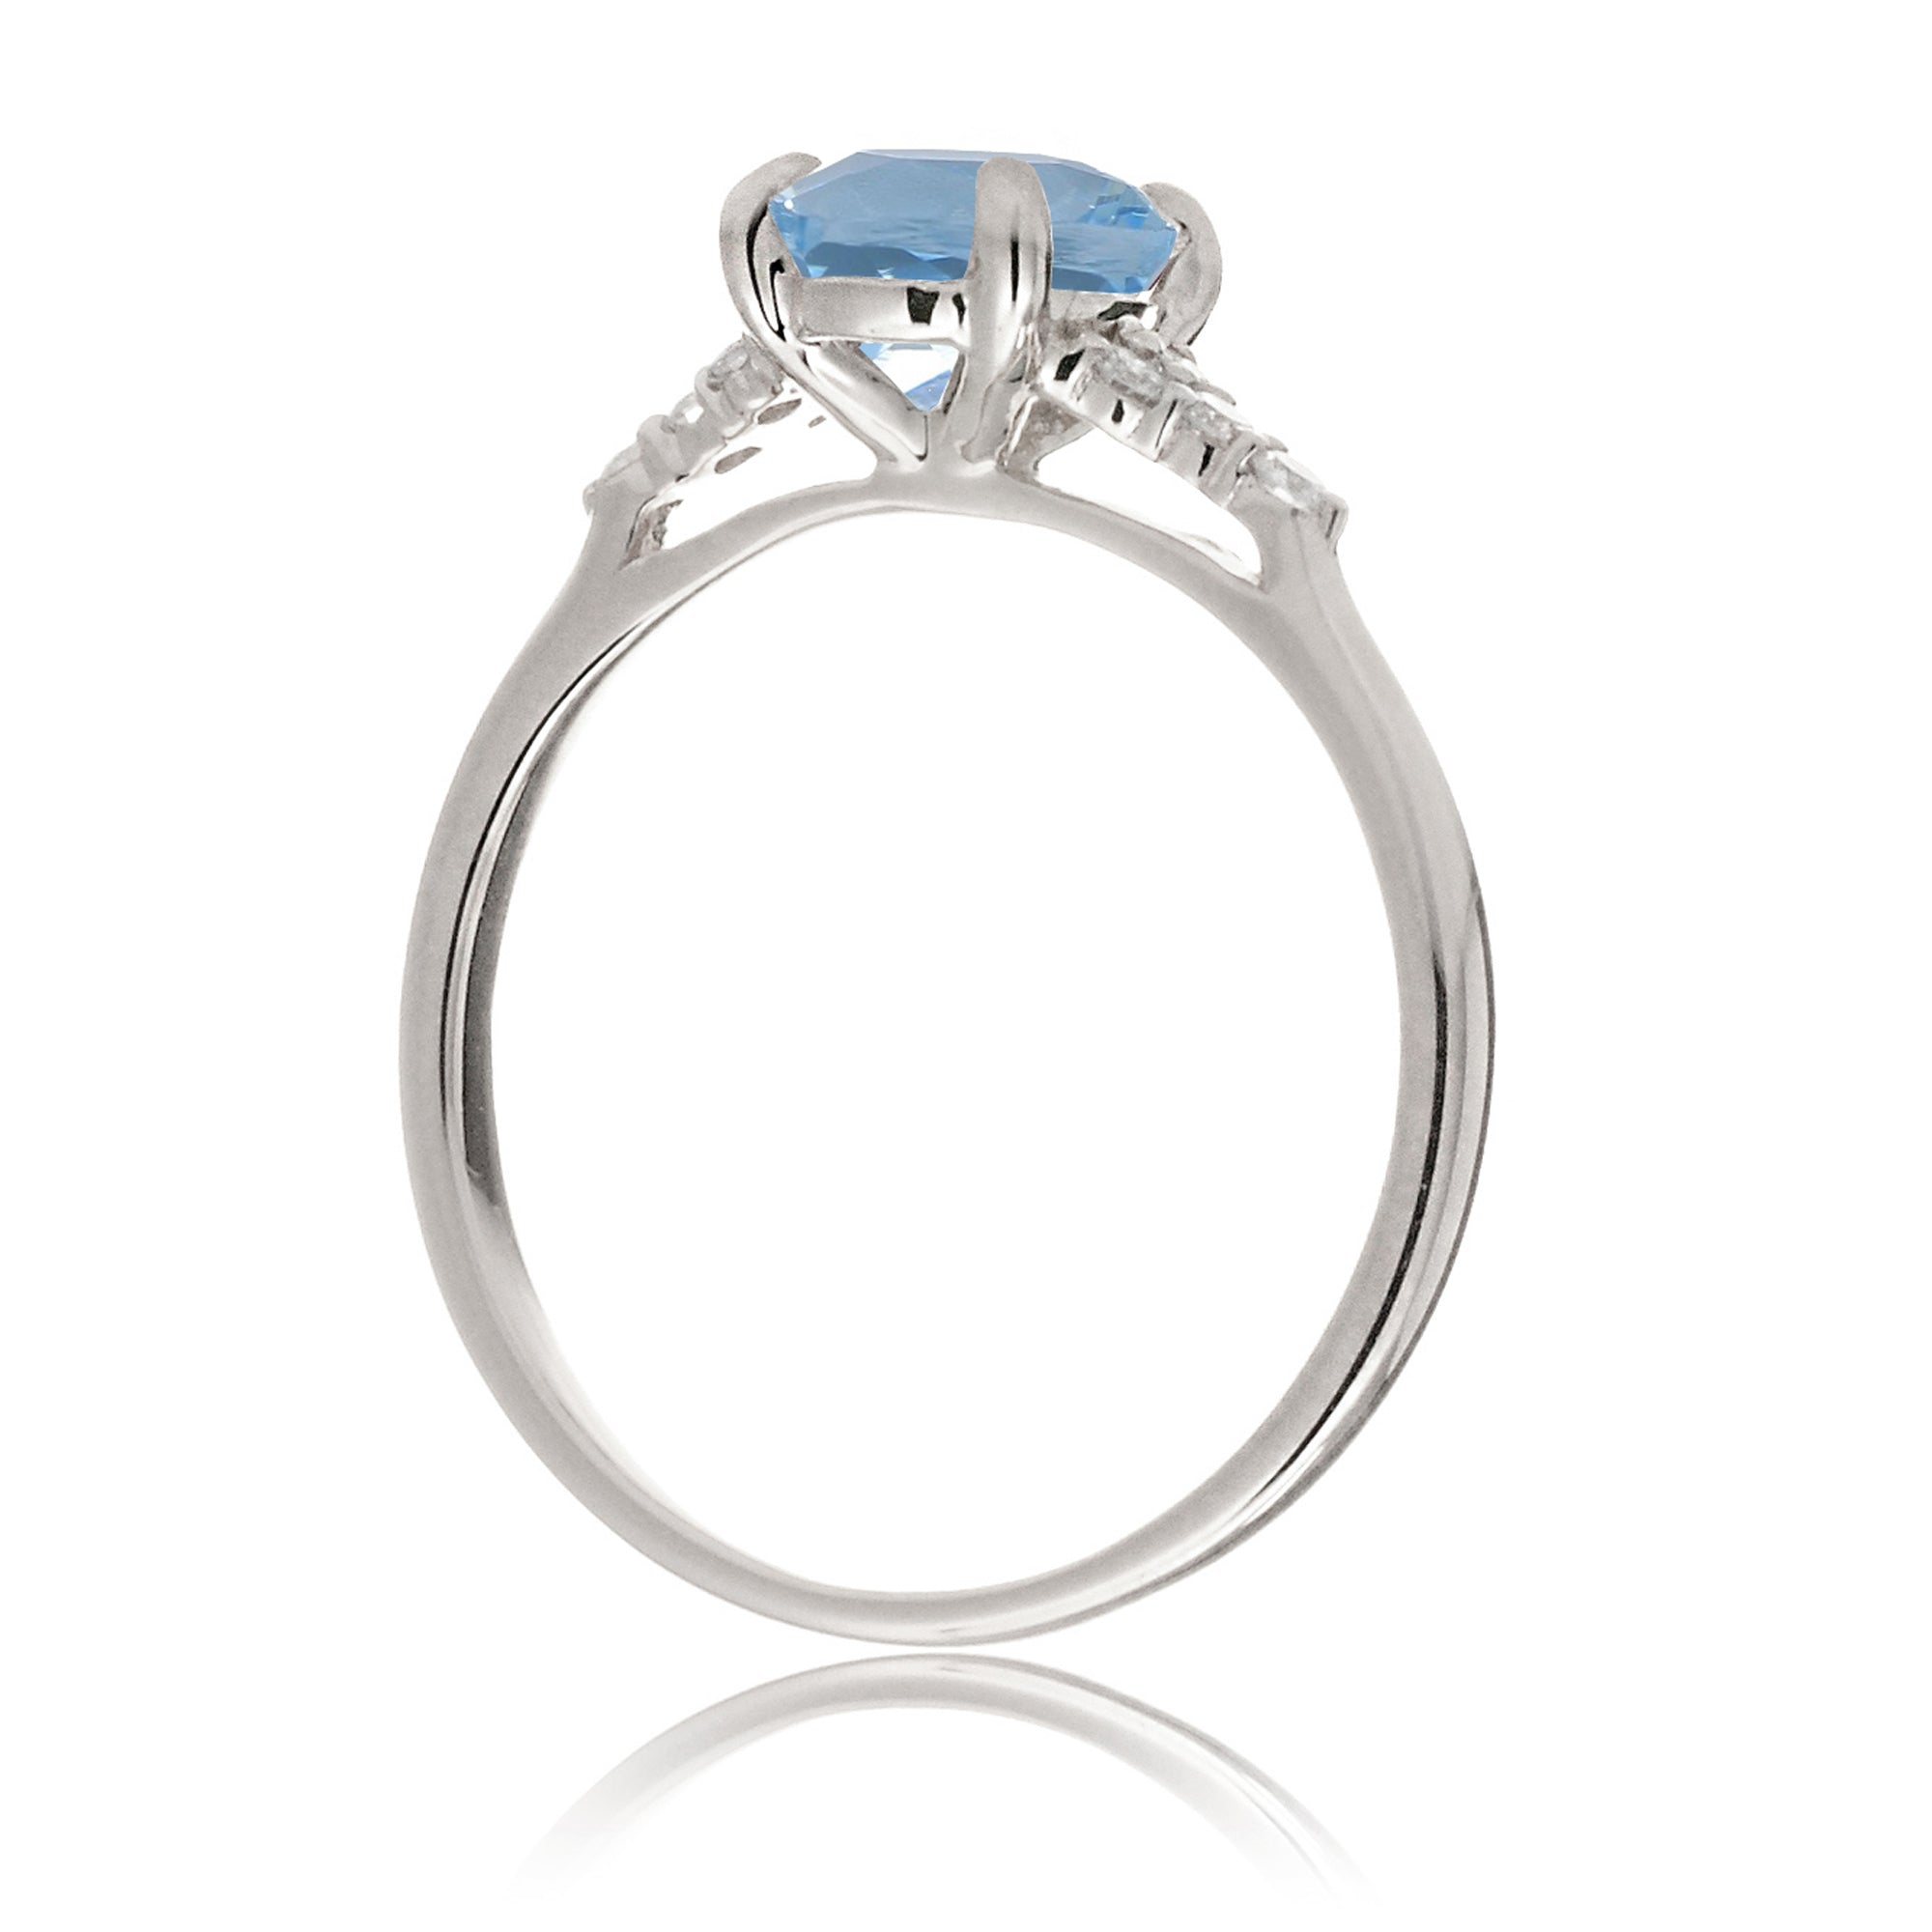 Aquamarine ring emerald cut with solid rounded band in white gold